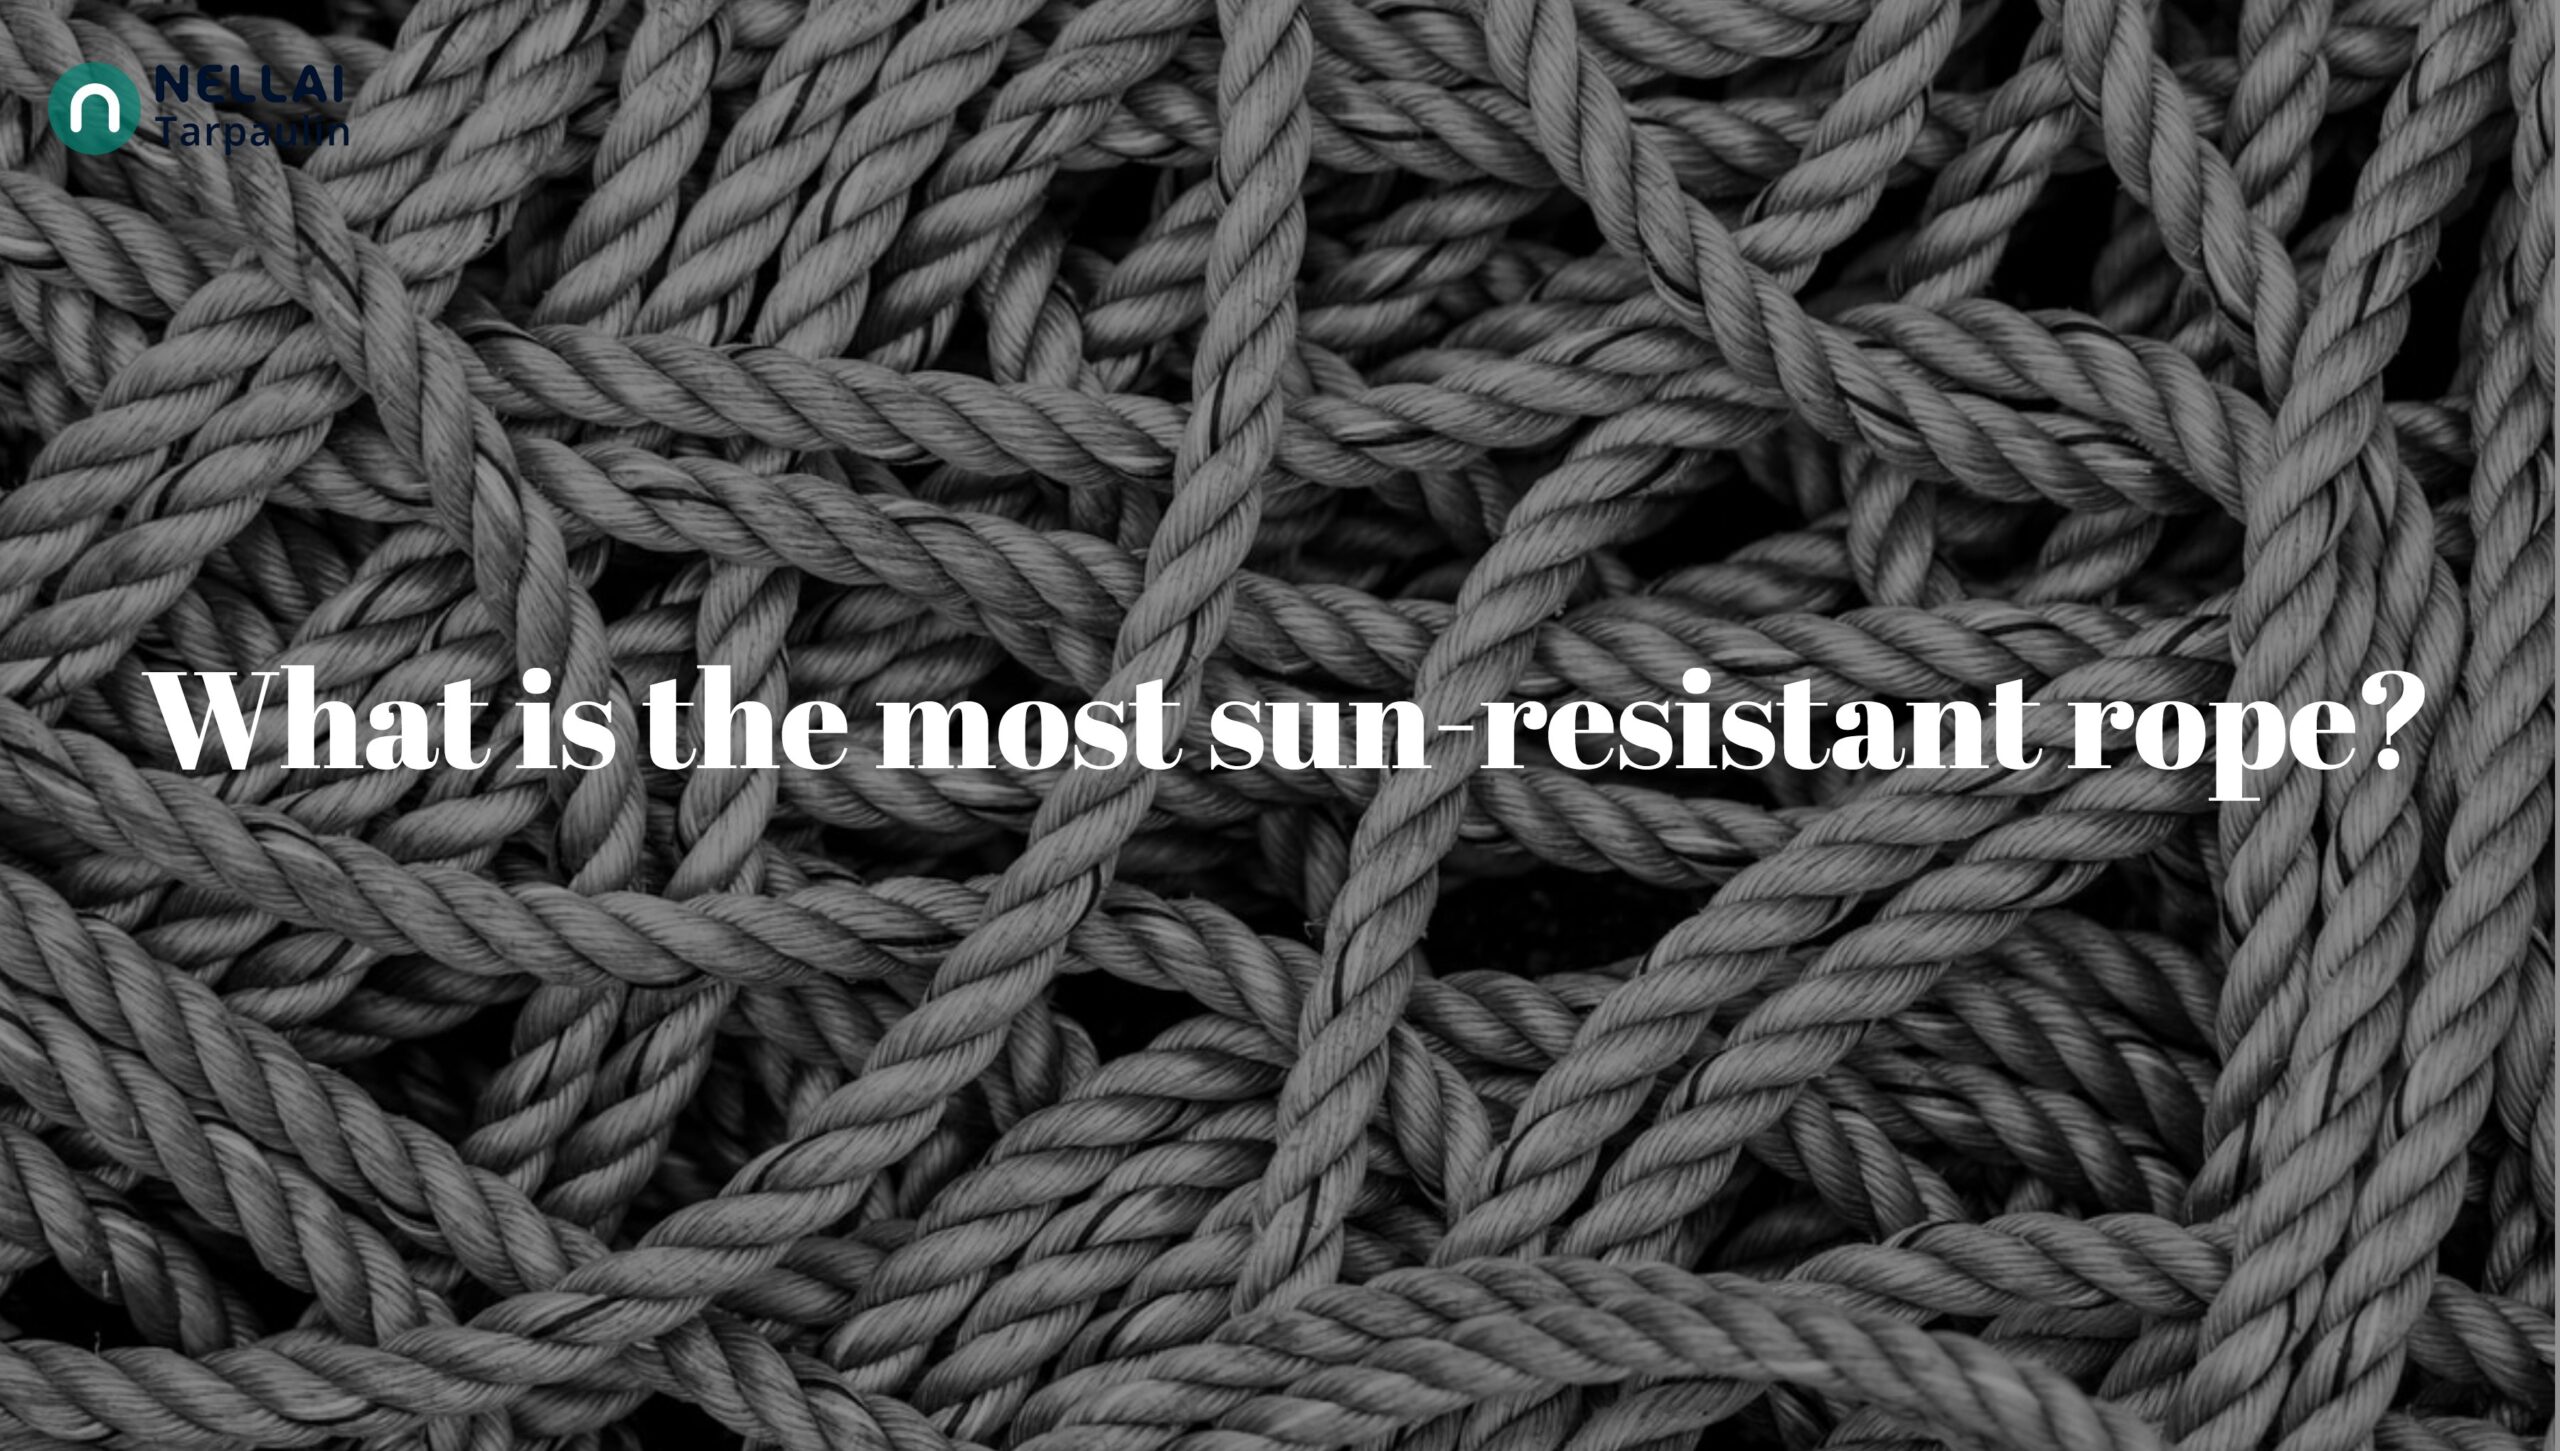 What is the most sun-resistant rope?